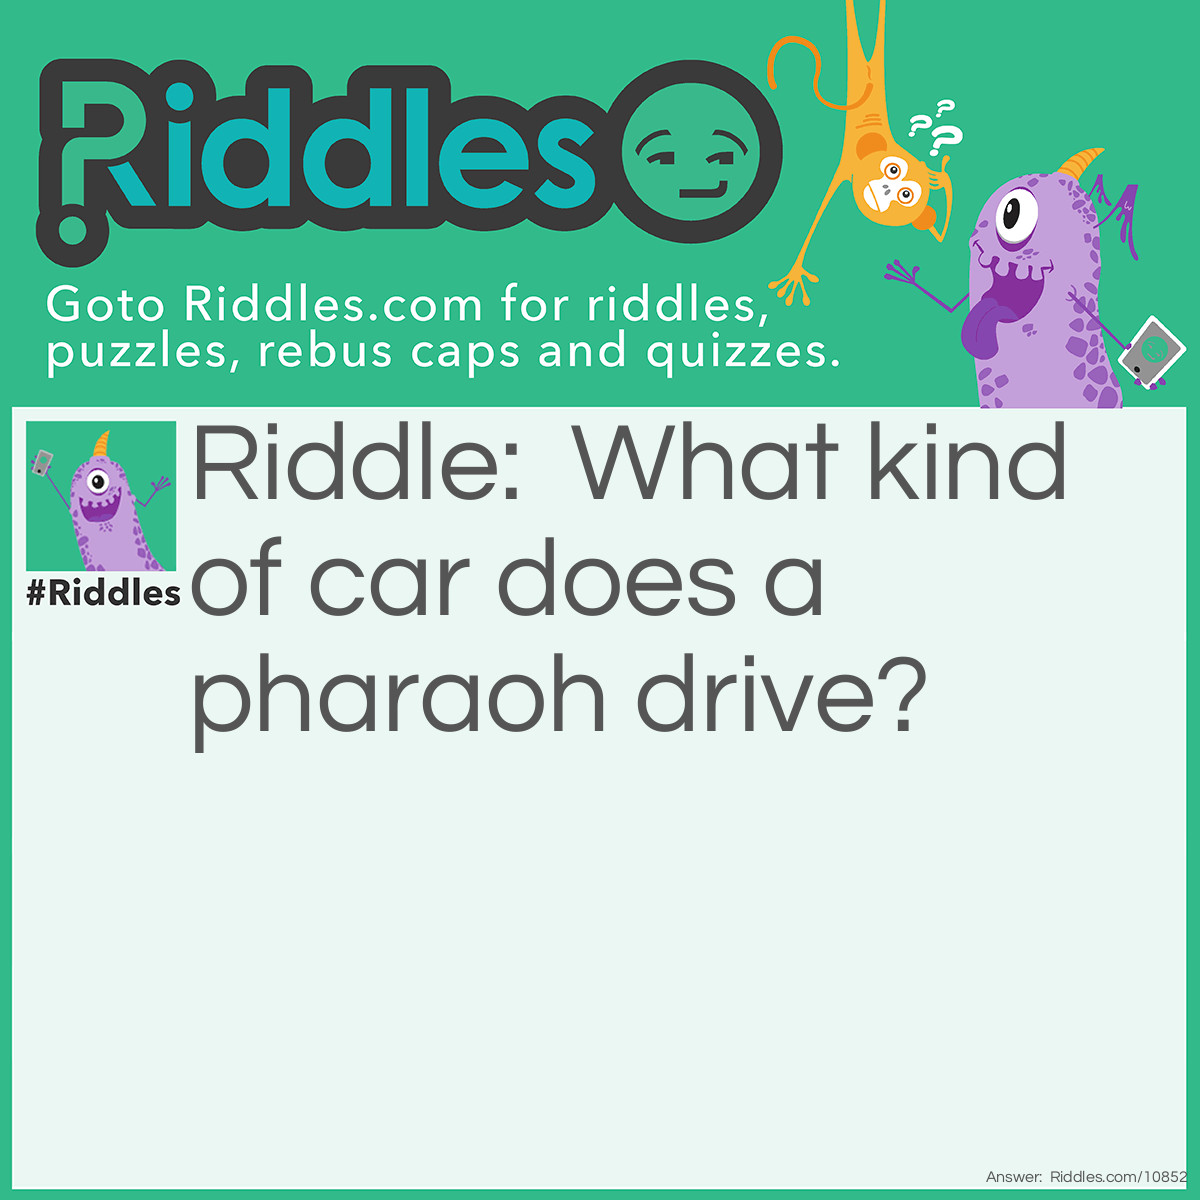 Riddle: What kind of car does a pharaoh drive? Answer: A new bus.